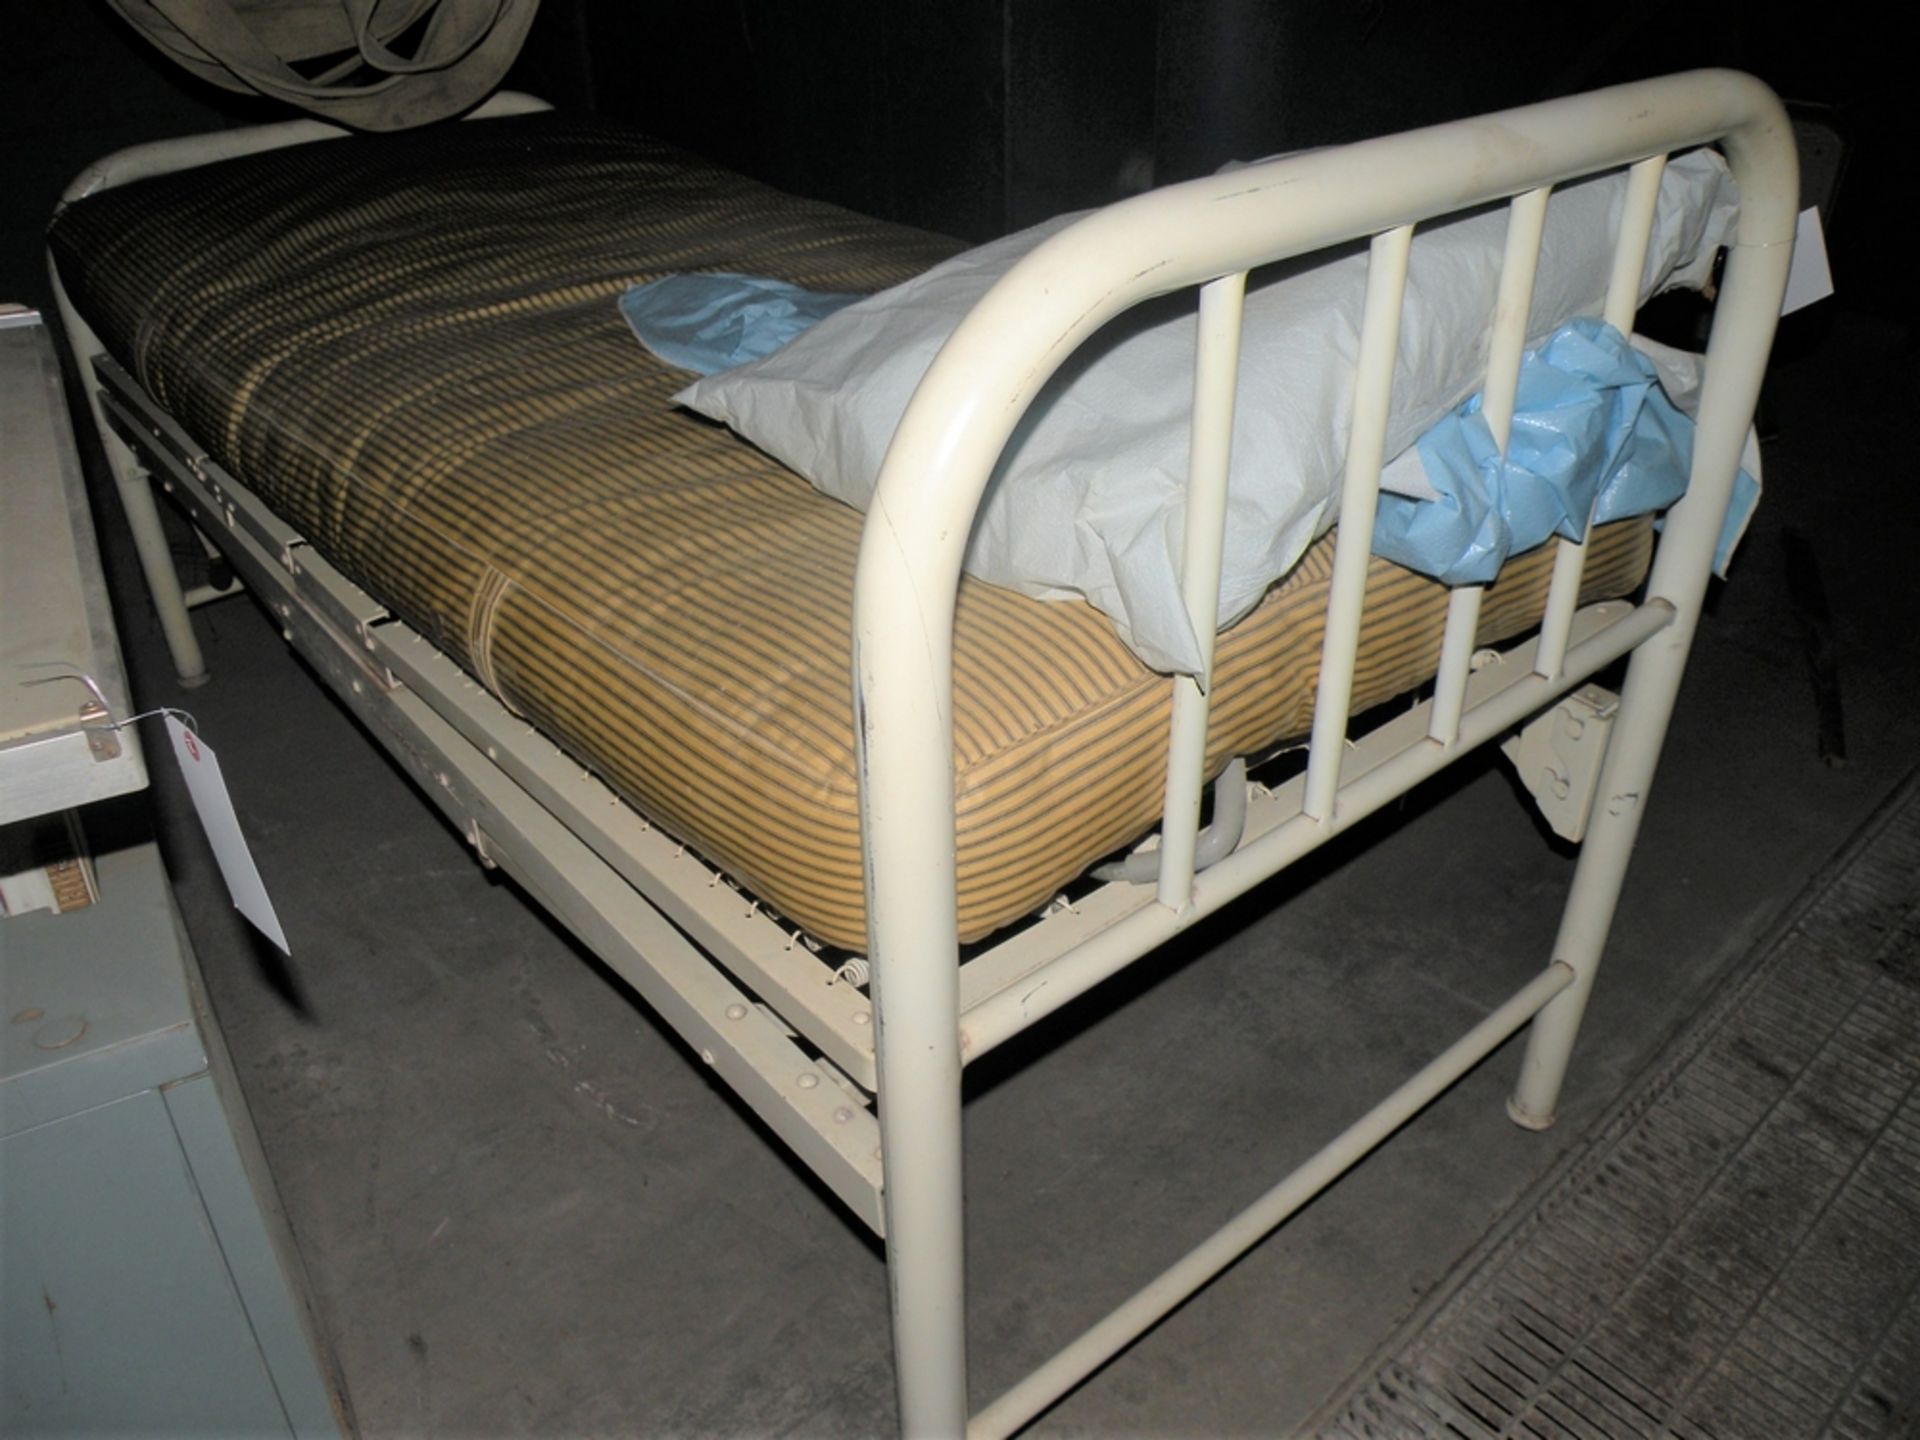 First Aid Bed, Adjustable Metal Frame (Martin, TN) - Image 2 of 2